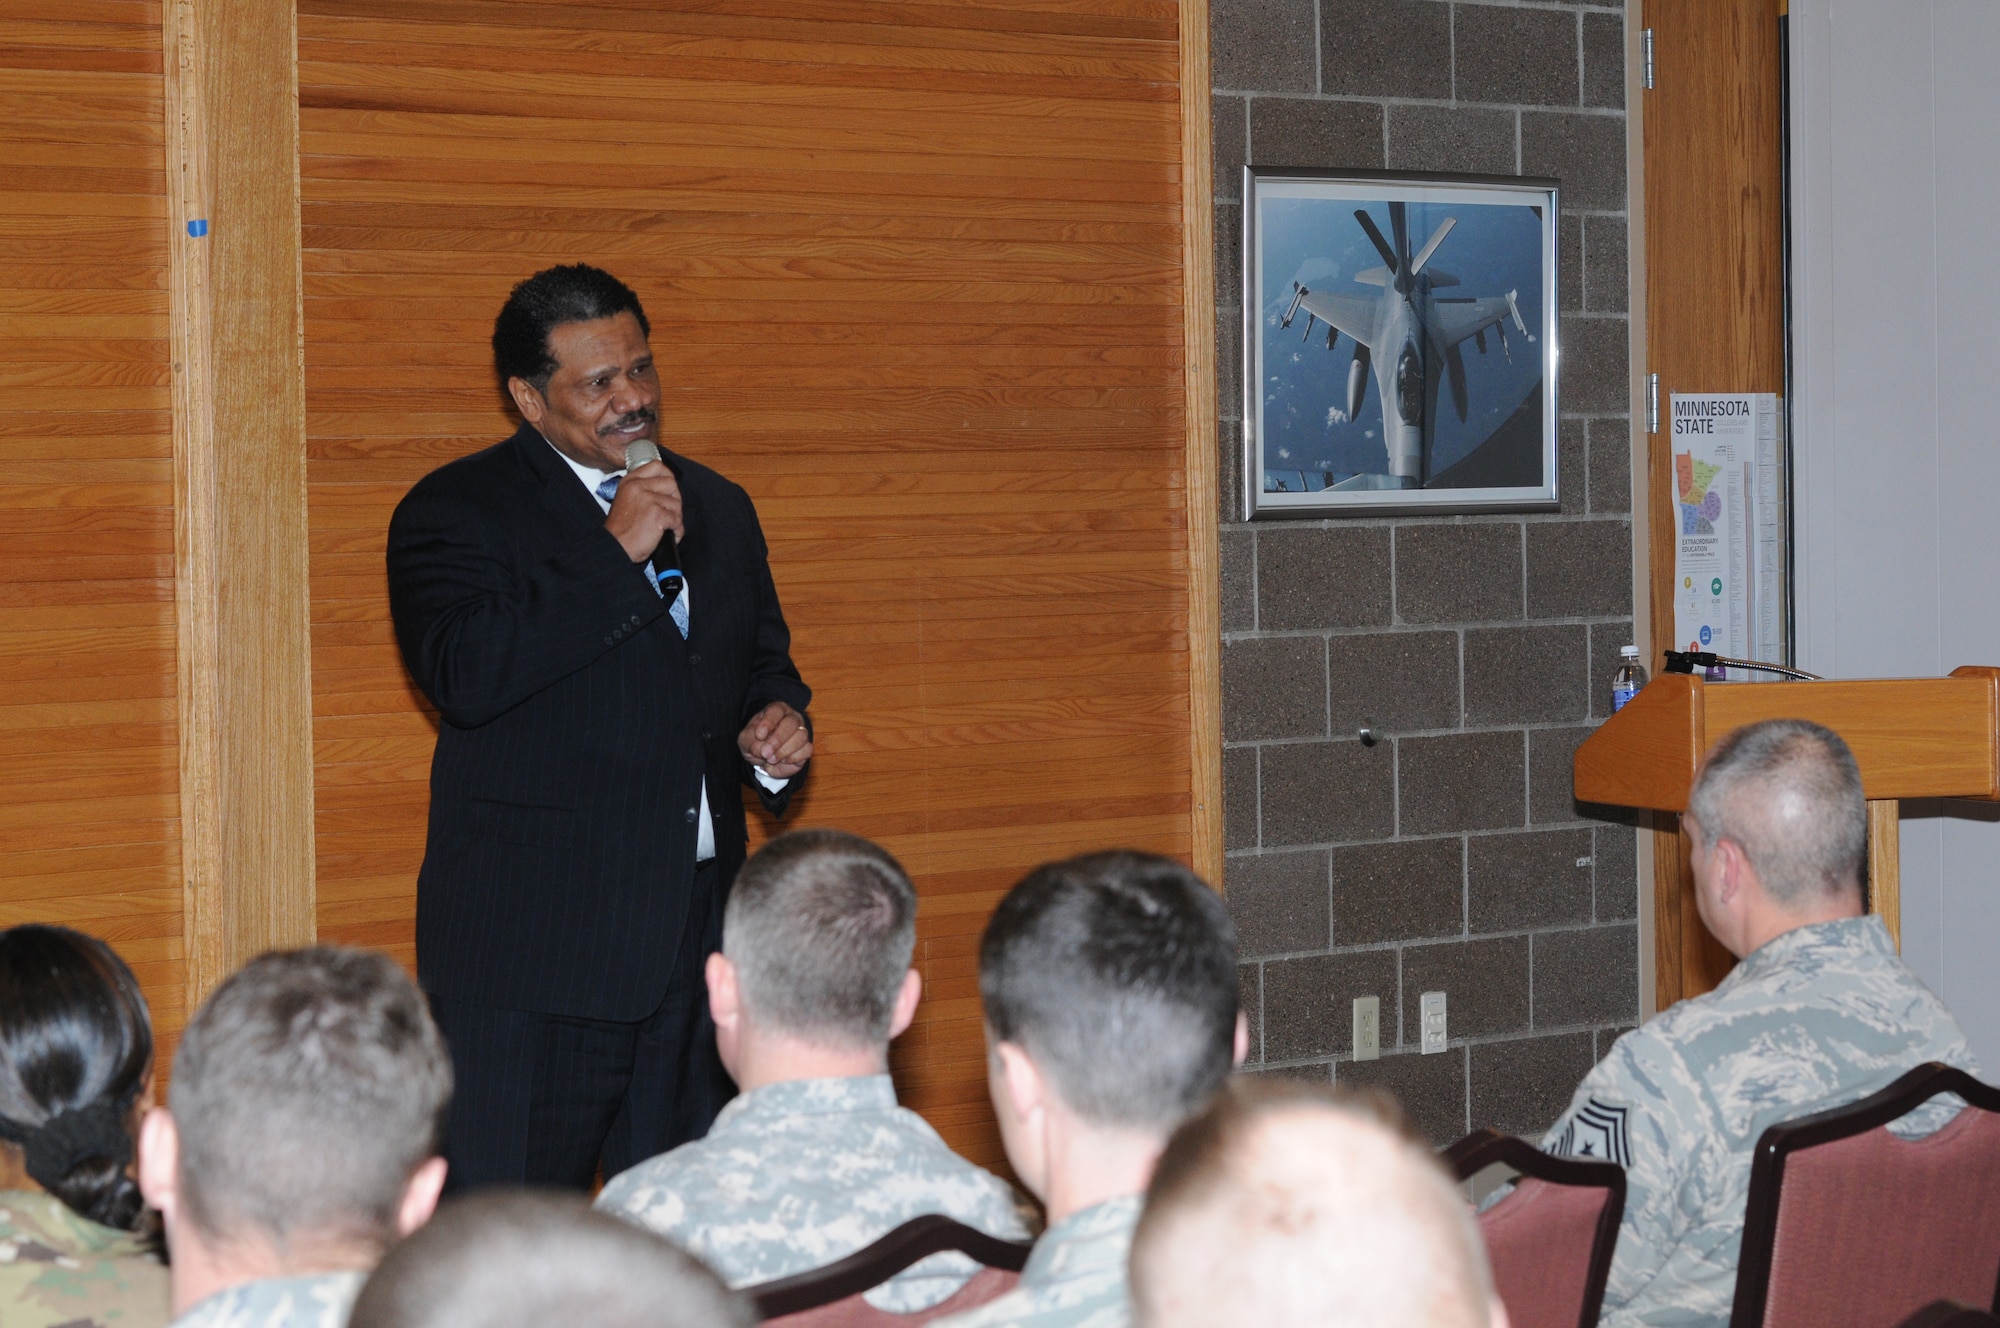 Pastor Billy G. Russell, Senior Pastor of Greater Friendship Missionary Baptist Church, Minneapolis, Minn., shares remarks with members of the Minnesota National Guard while in Duluth, Minn., on Feb. 5, 2016.  Russell was at the 148th Fighter Wing to share his experiences about the hardships he encountered growing up during racial segregation and to talk about the importance of diversity.  (U.S. Air National Guard photo by Master Sgt. Ralph Kapustka)